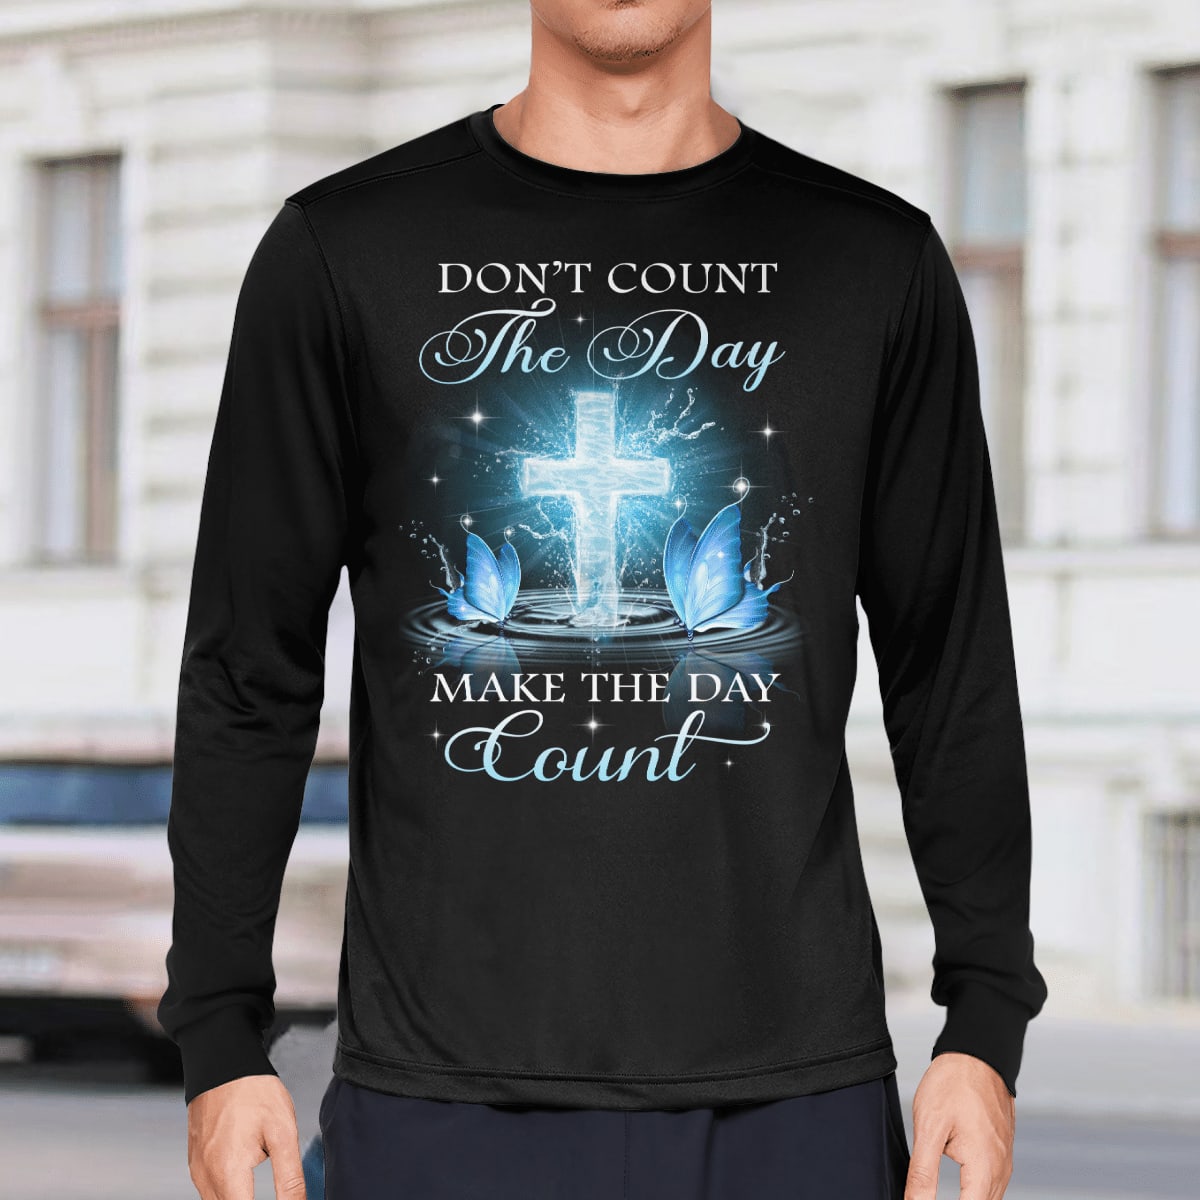 Don't Count The Day Make The Day Count God T-Shirt, Faith T-Shirt, Jesus Sweatshirt, Christ Unisex Hoodie